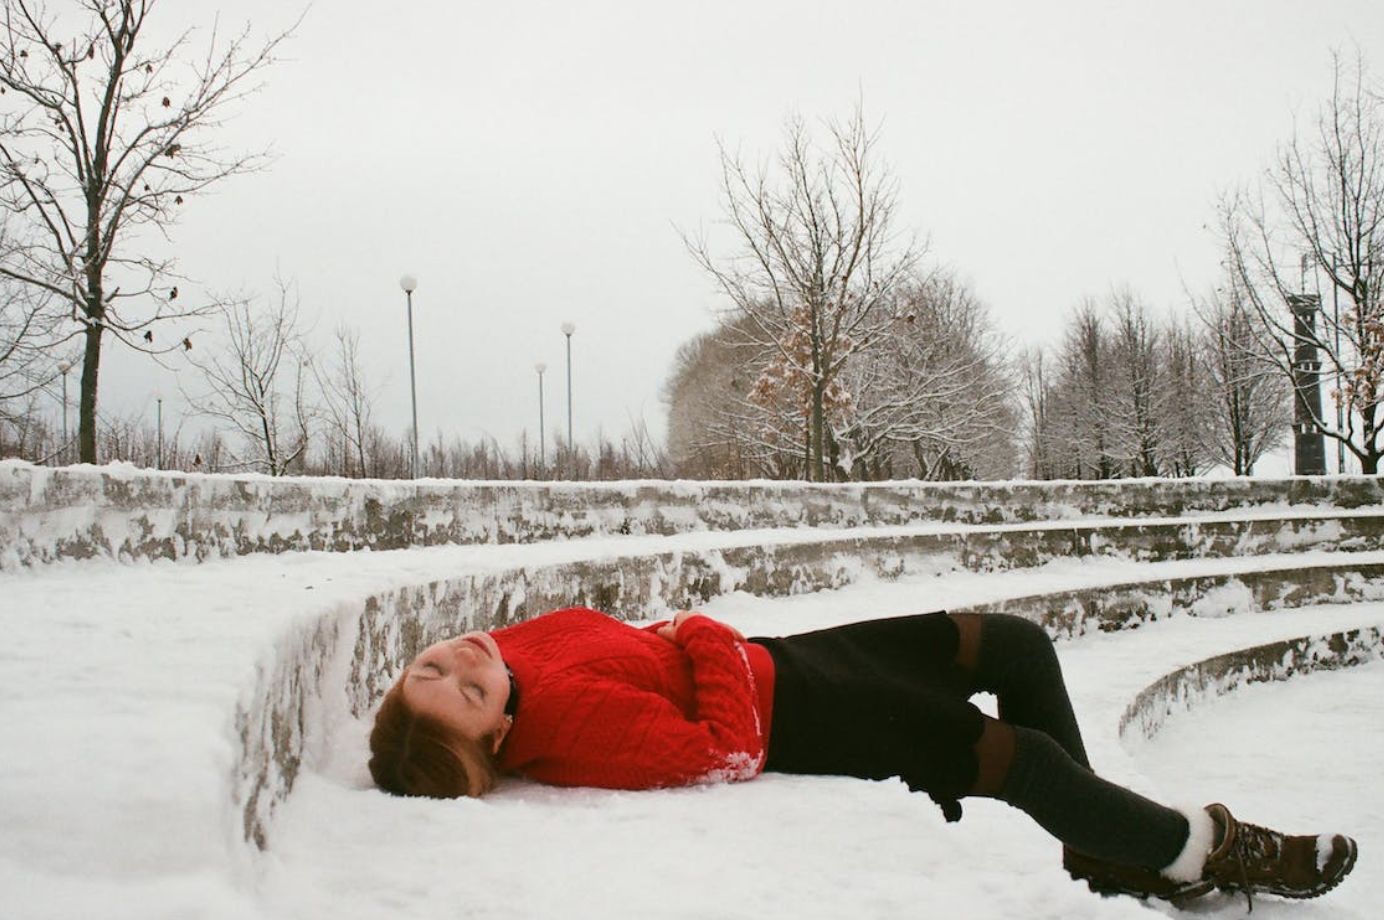 Woman in red coat and black pants laying on snow-covered steps; image by Darya Sannikova, via Pexels.com.